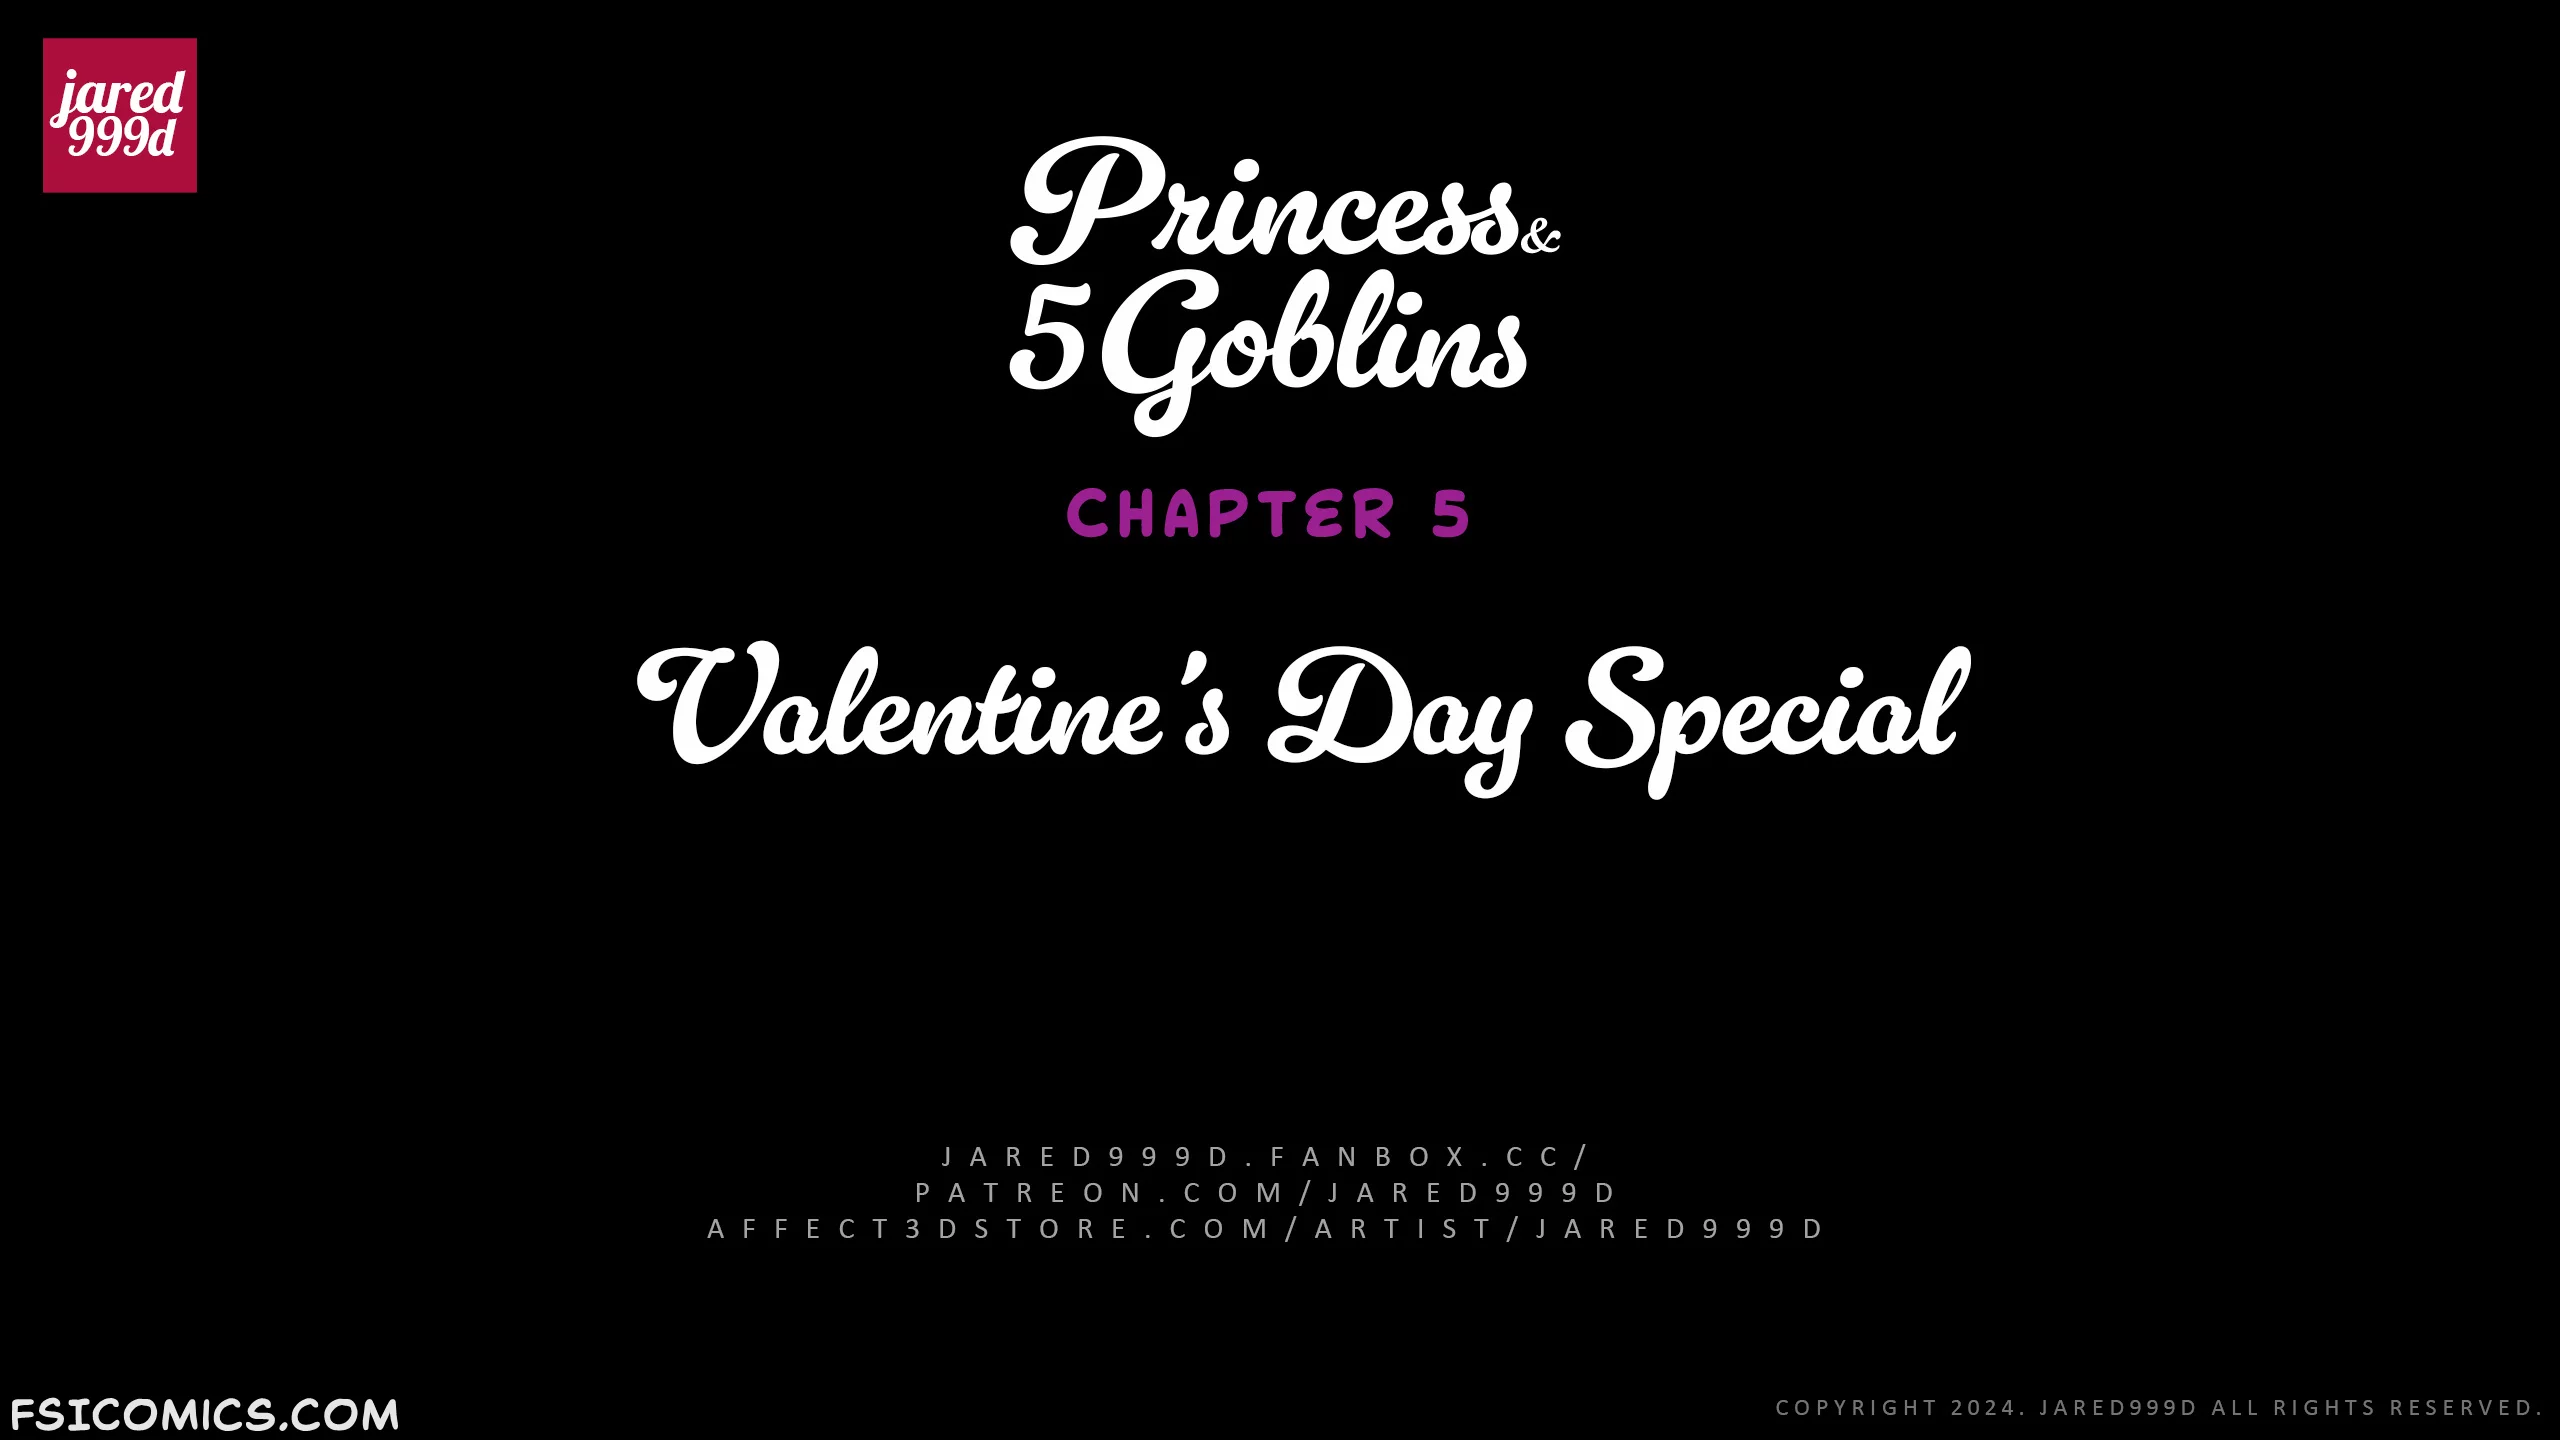 Princess And 5 Goblins Chapter 5 Valentines Day Special – Jared999D - 3 - FSIComics